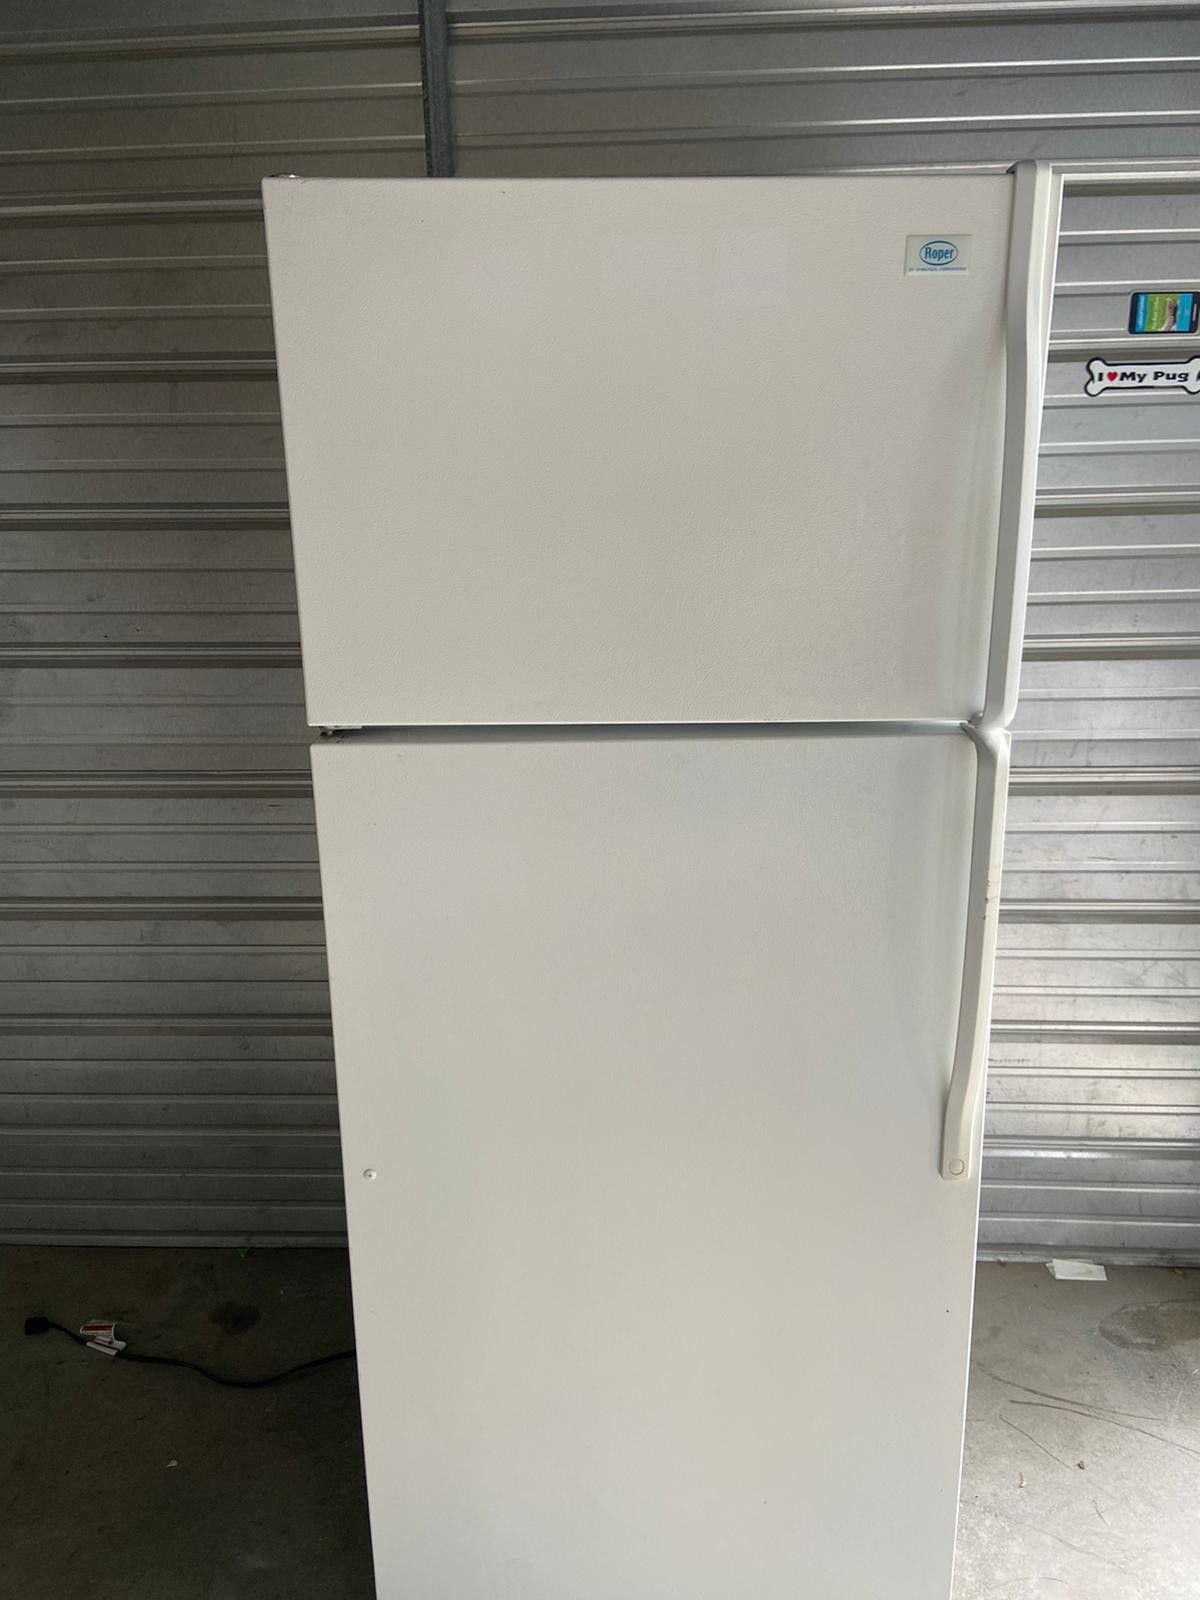 Whirlpool Apartment Size Refrigerator. Works great(willing to deliver for free